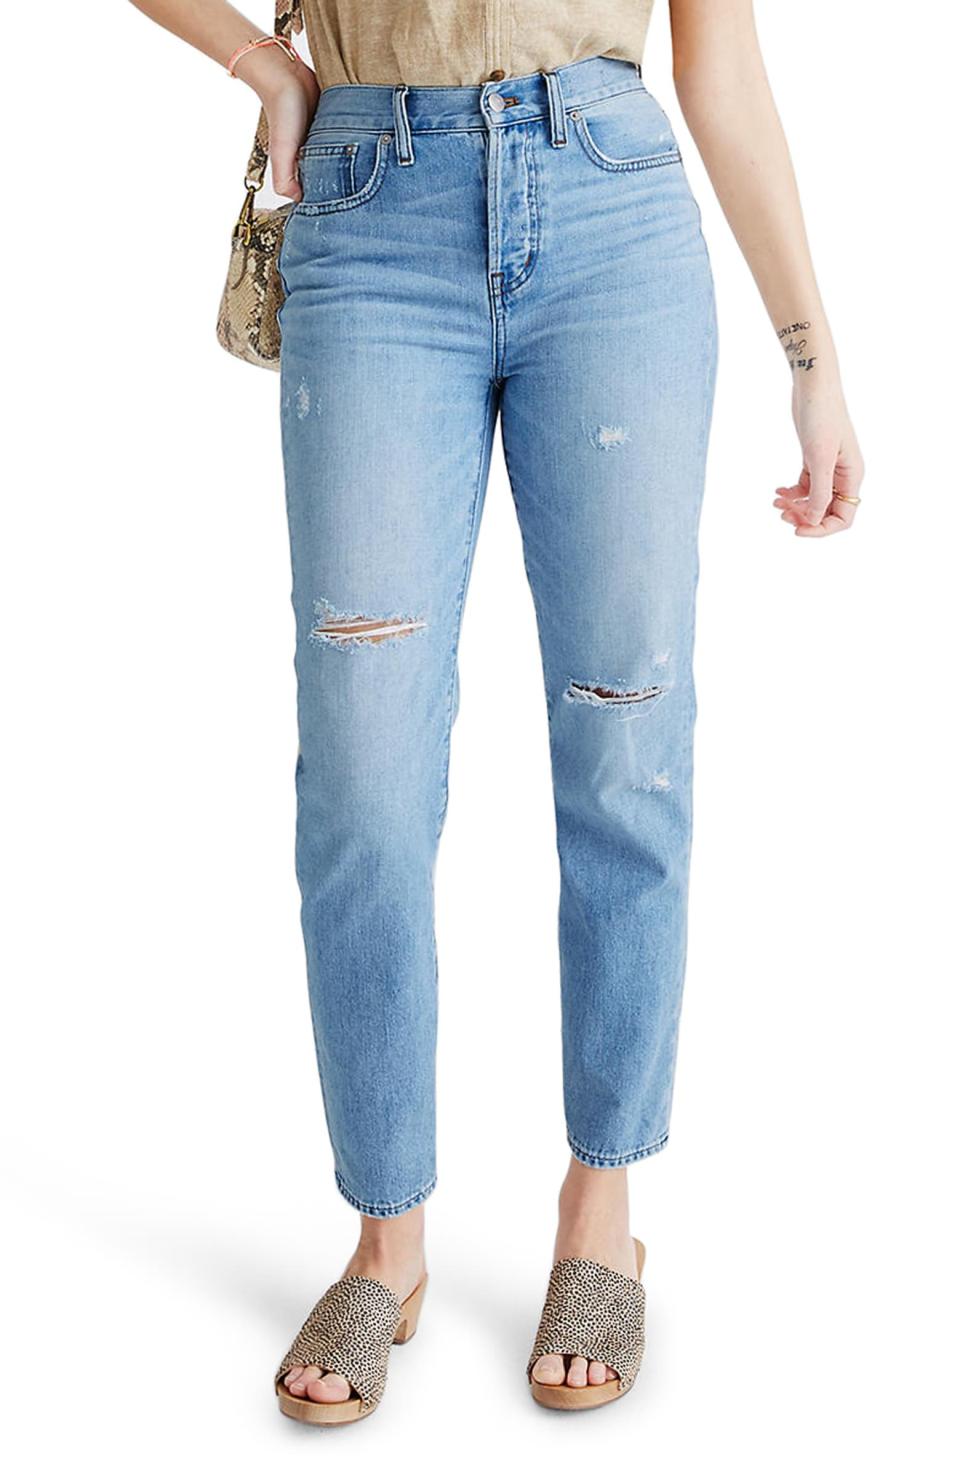 Madewell The Perfect Vintage Jean. Image via Nordstrom.